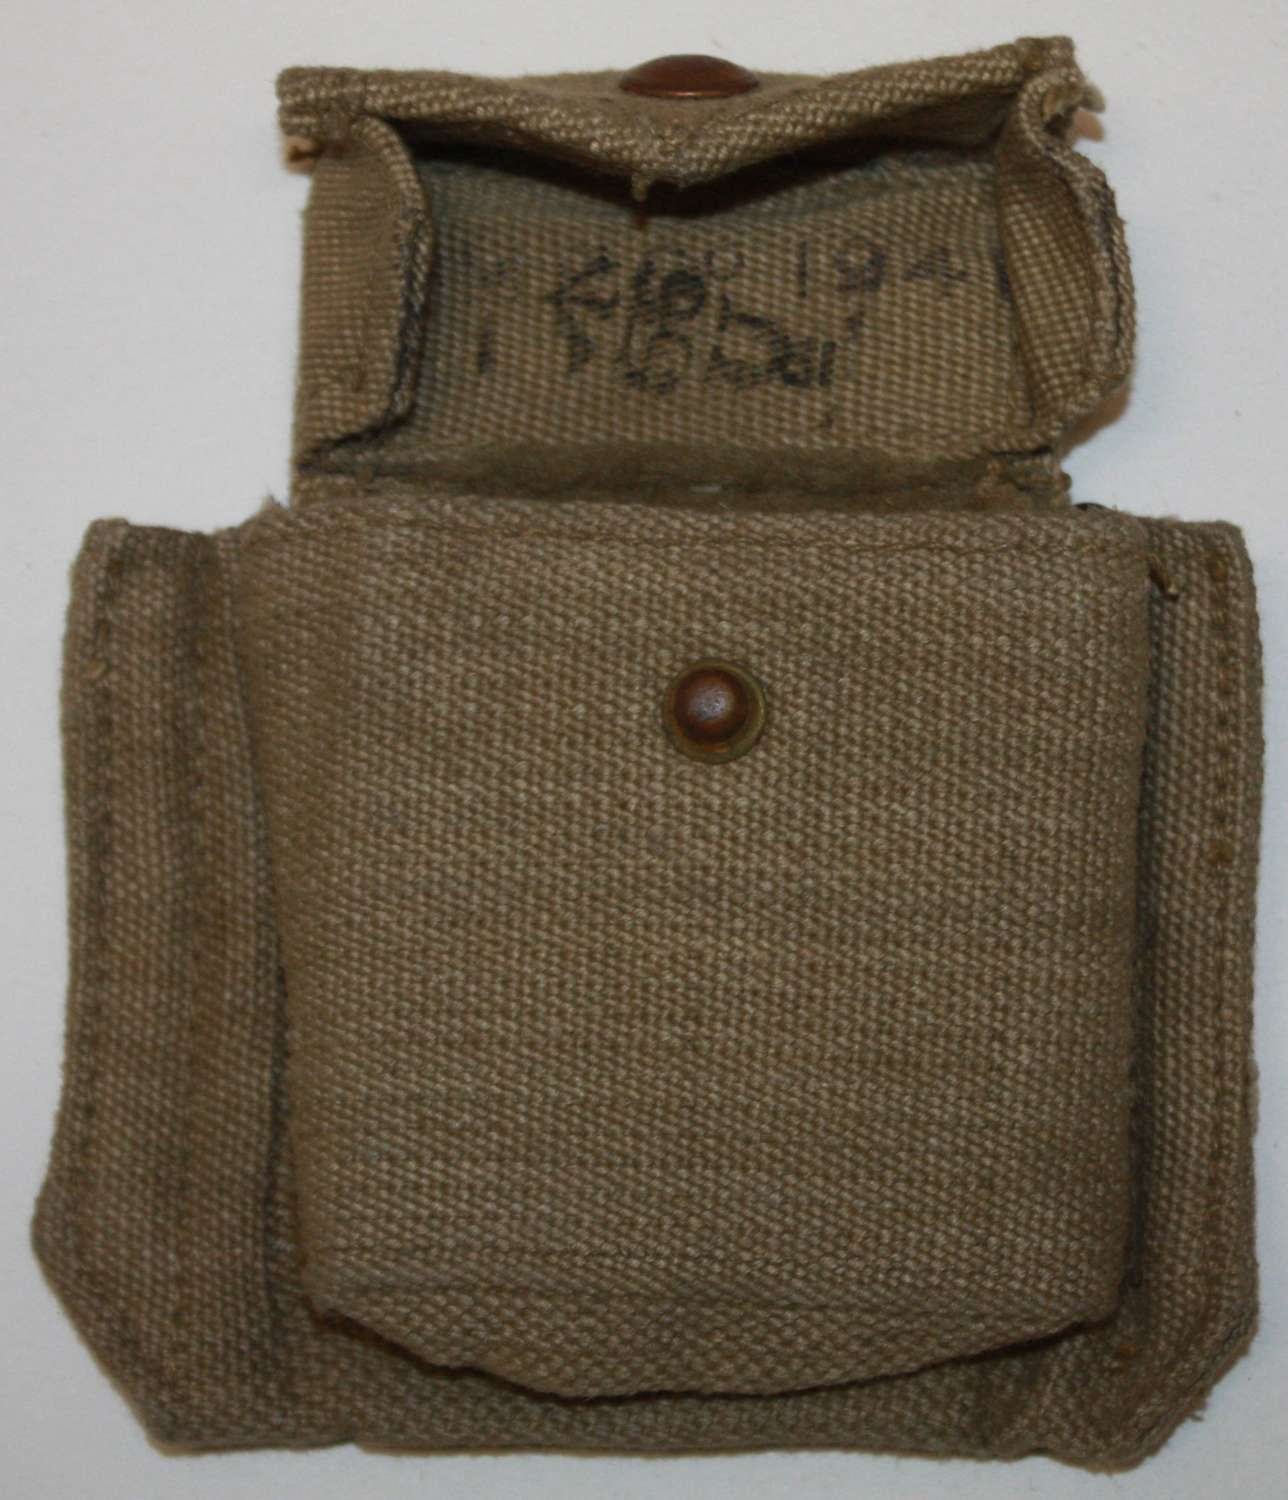 A GOOD 1941 DATED MECO 37 PATTERN COMPASS POUCH